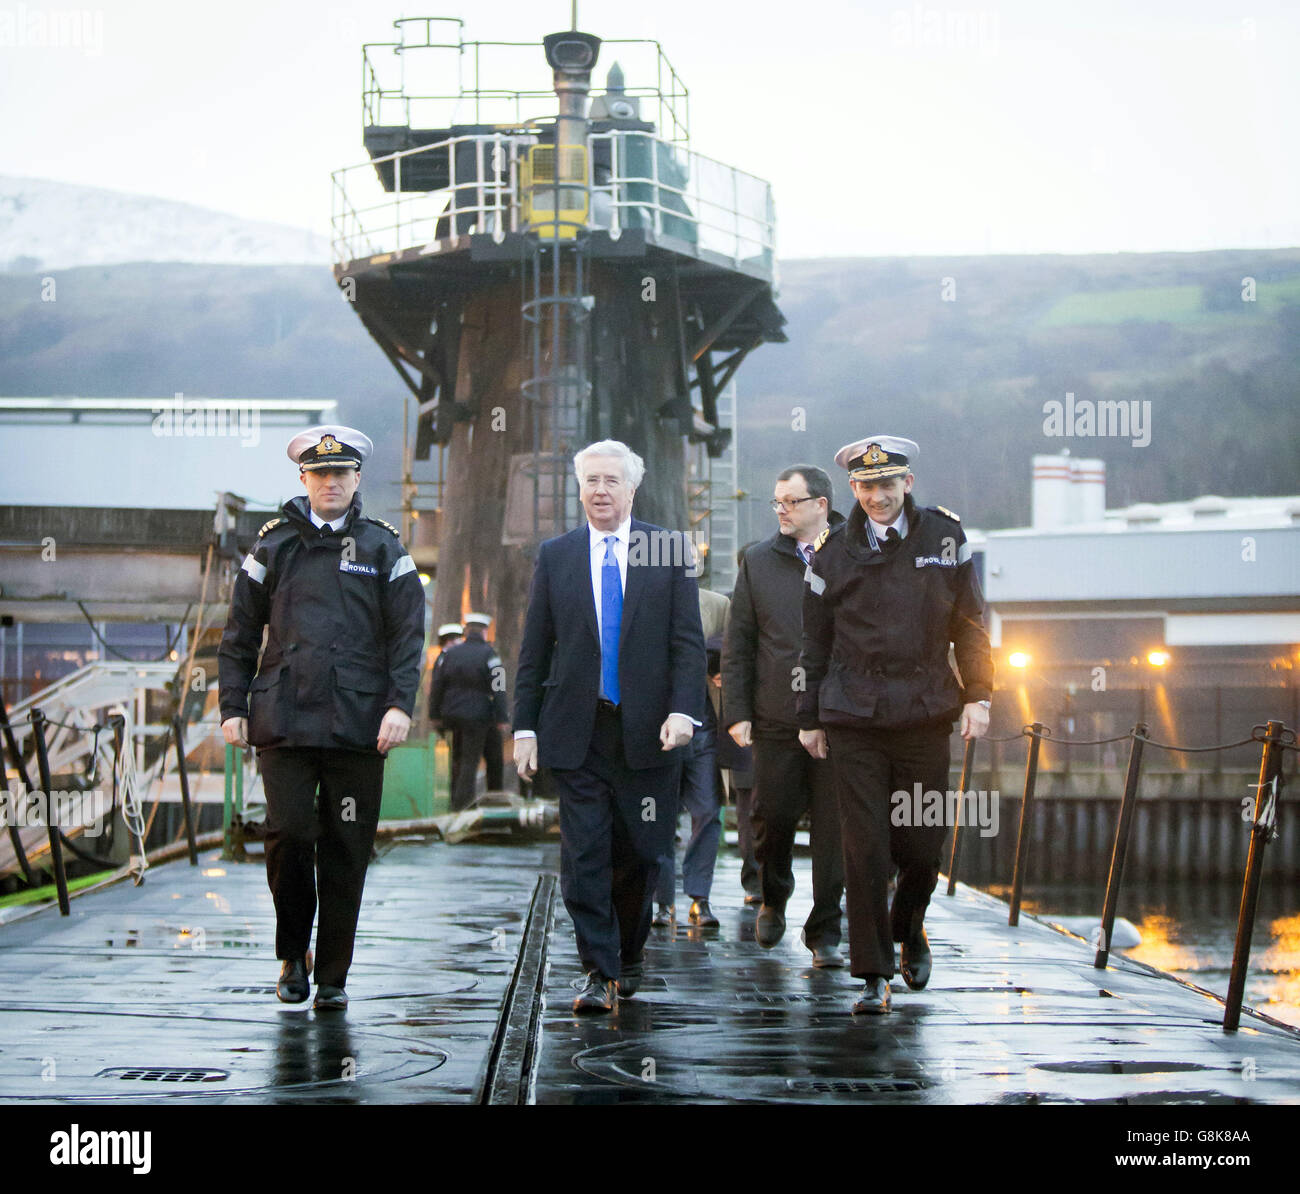 Defence Secretary Michael Fallon (centre) with Daniel Martyn (left) Commanding Officer of HMS Vigilant and Rear Admiral of Submarines and Assistant Chief of Naval Staff John Weale (right) during a visit to Vanguard-class submarine HMS Vigilant, one of the UK's four nuclear warhead-carrying submarines, at HM Naval Base Clyde, also known as Faslane, in Scotland. Stock Photo